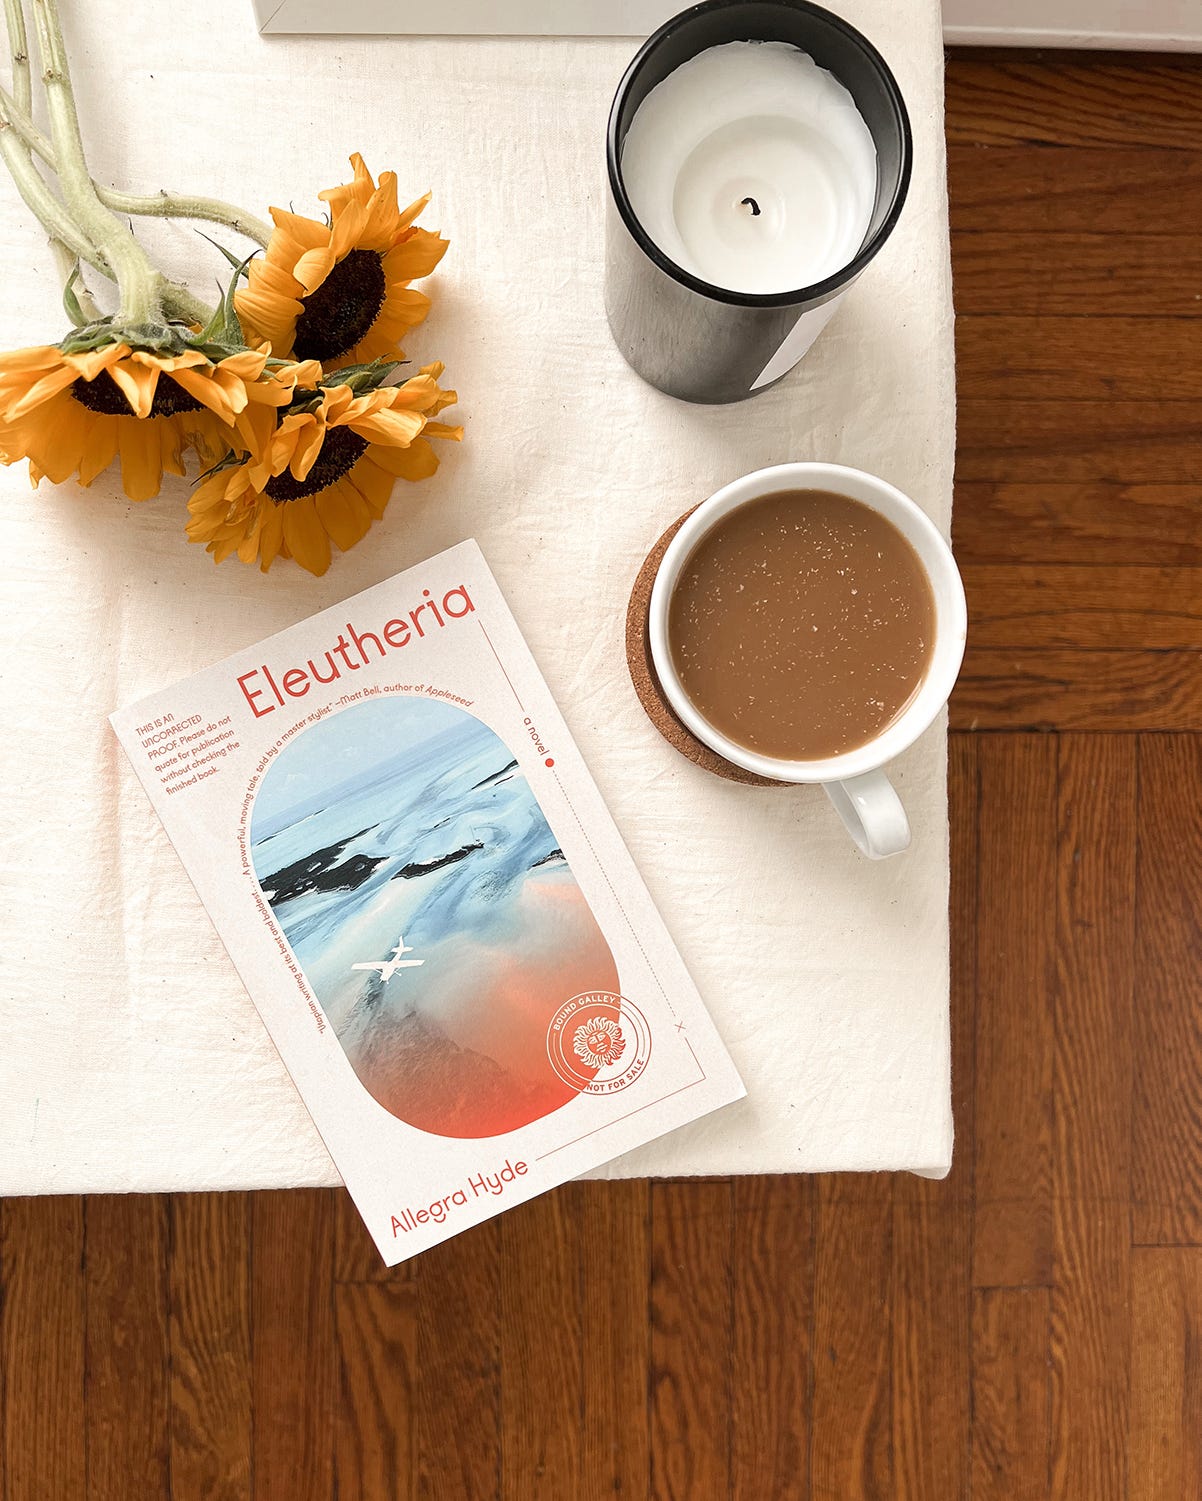 Eleutheria by Allegra Hyde : Book review